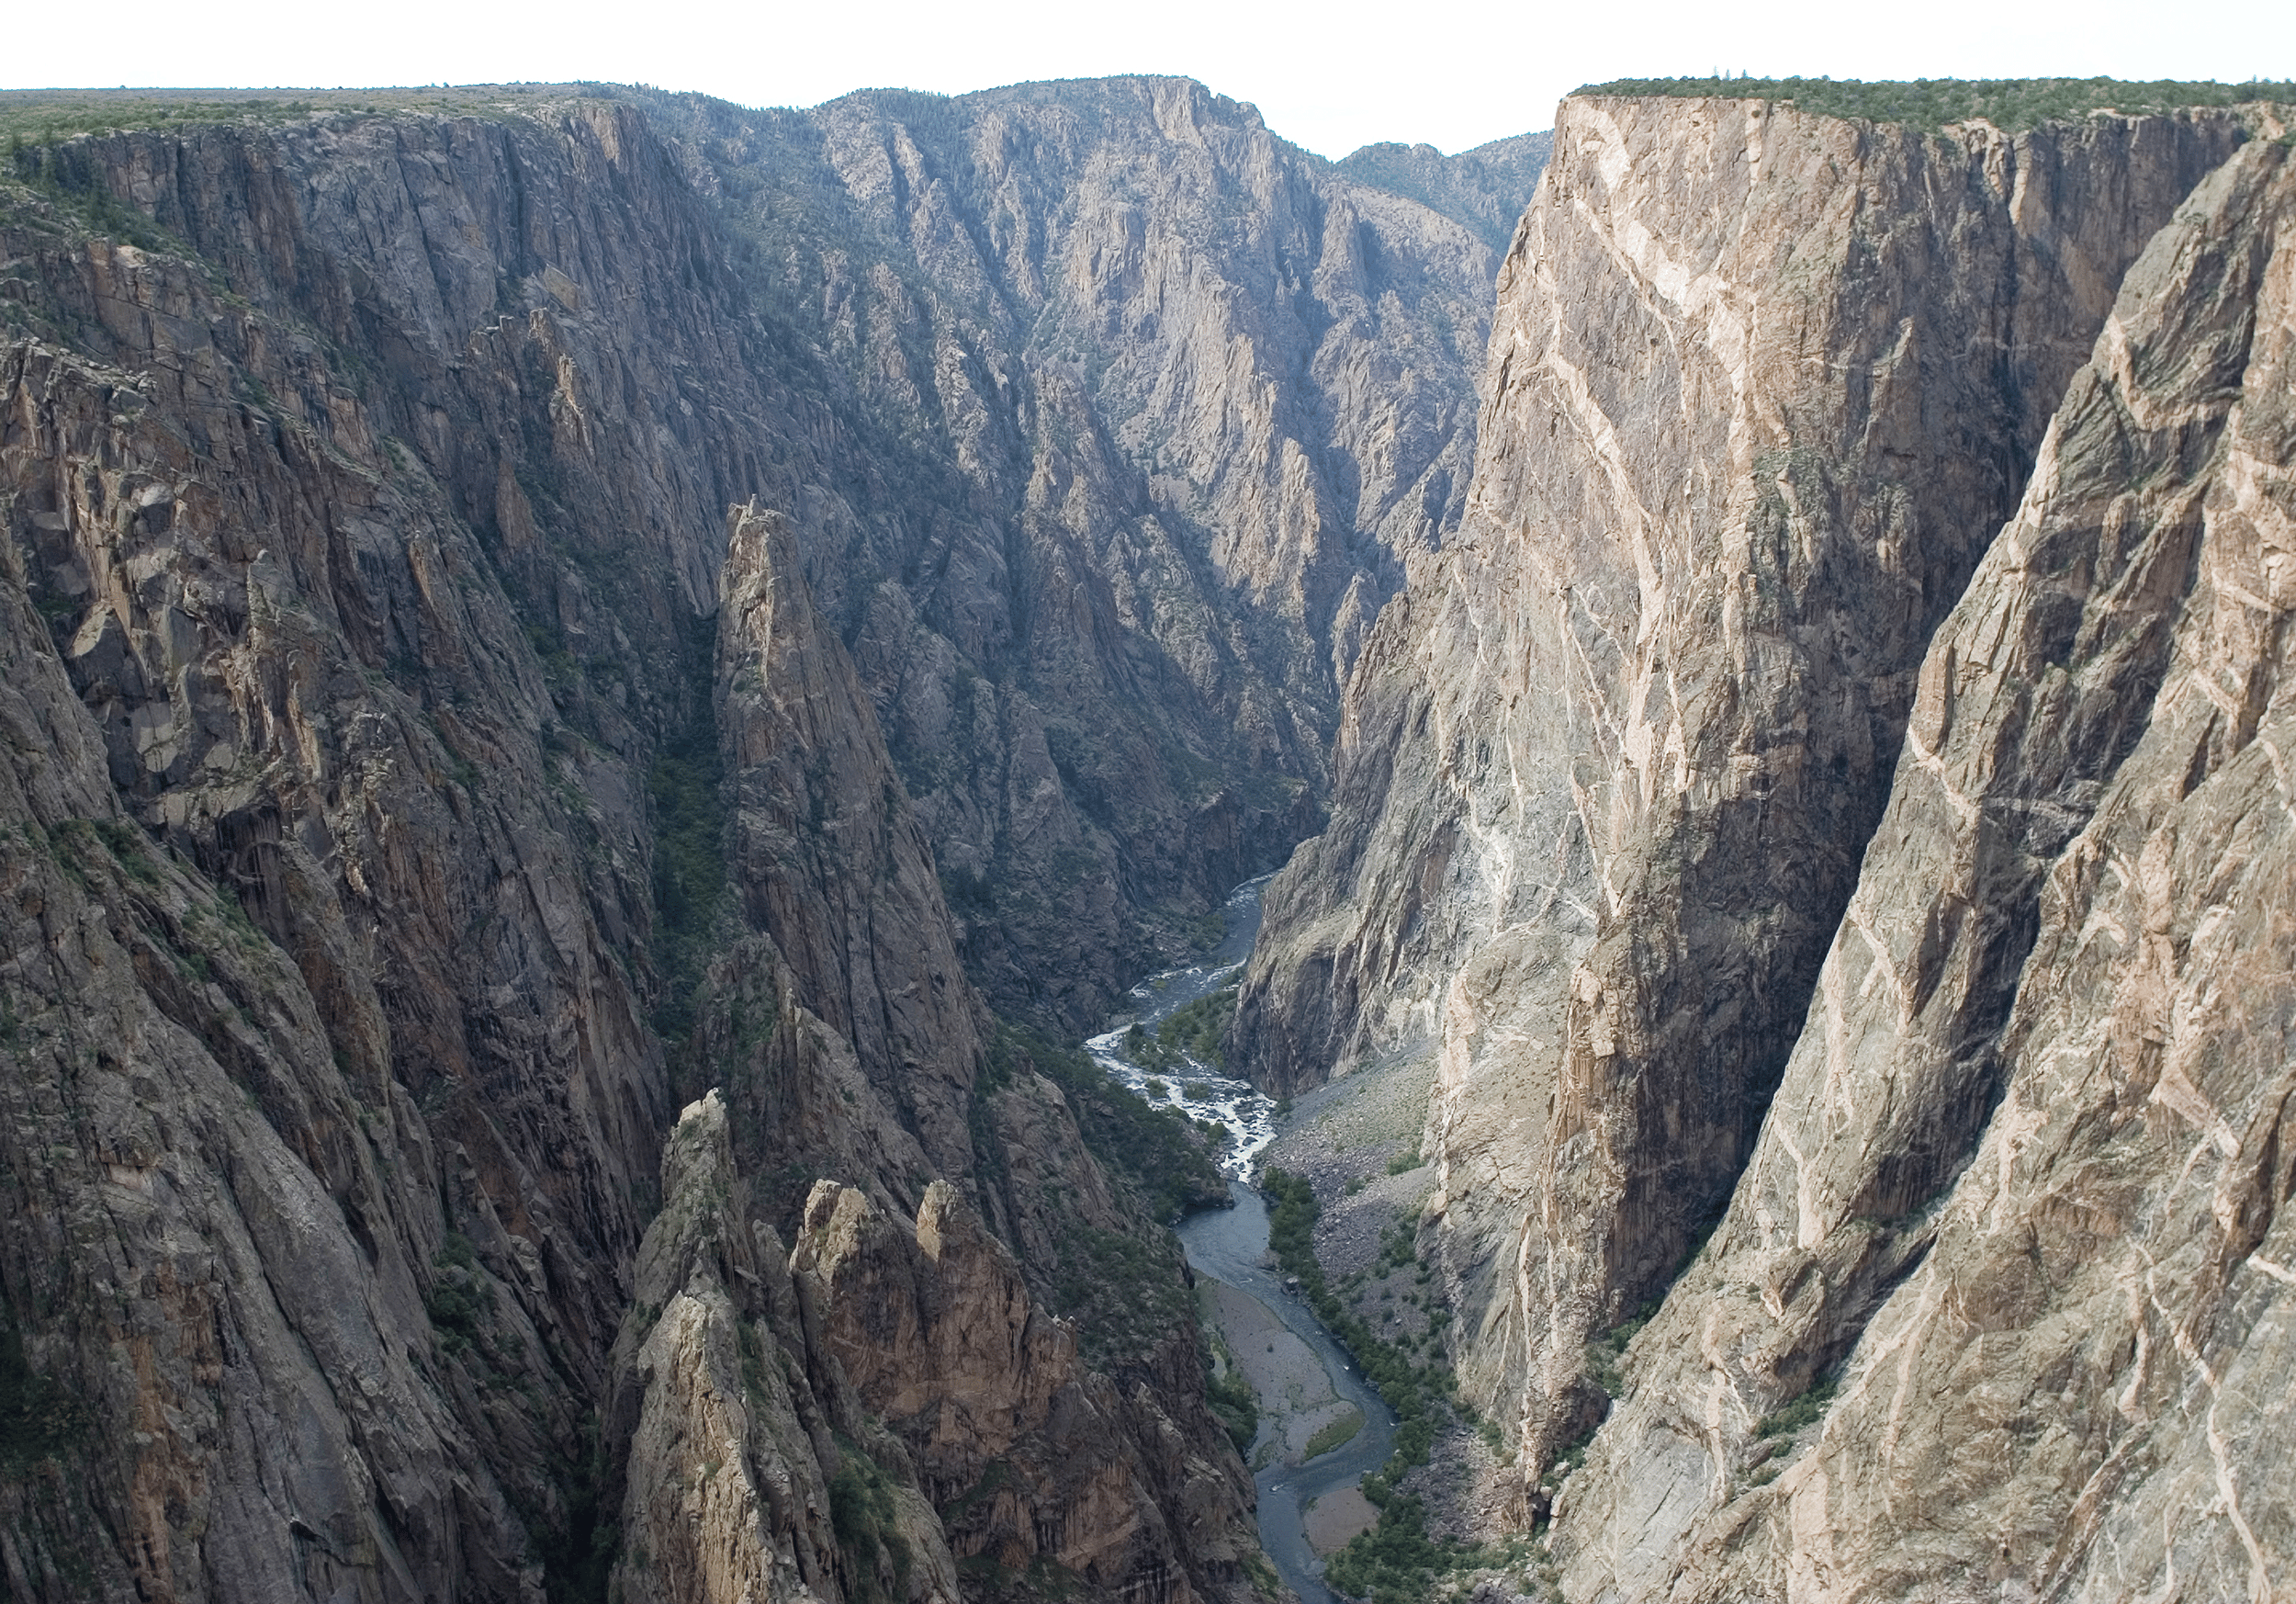 Painted Wall  | Black Canyon of the Gunnison Facts